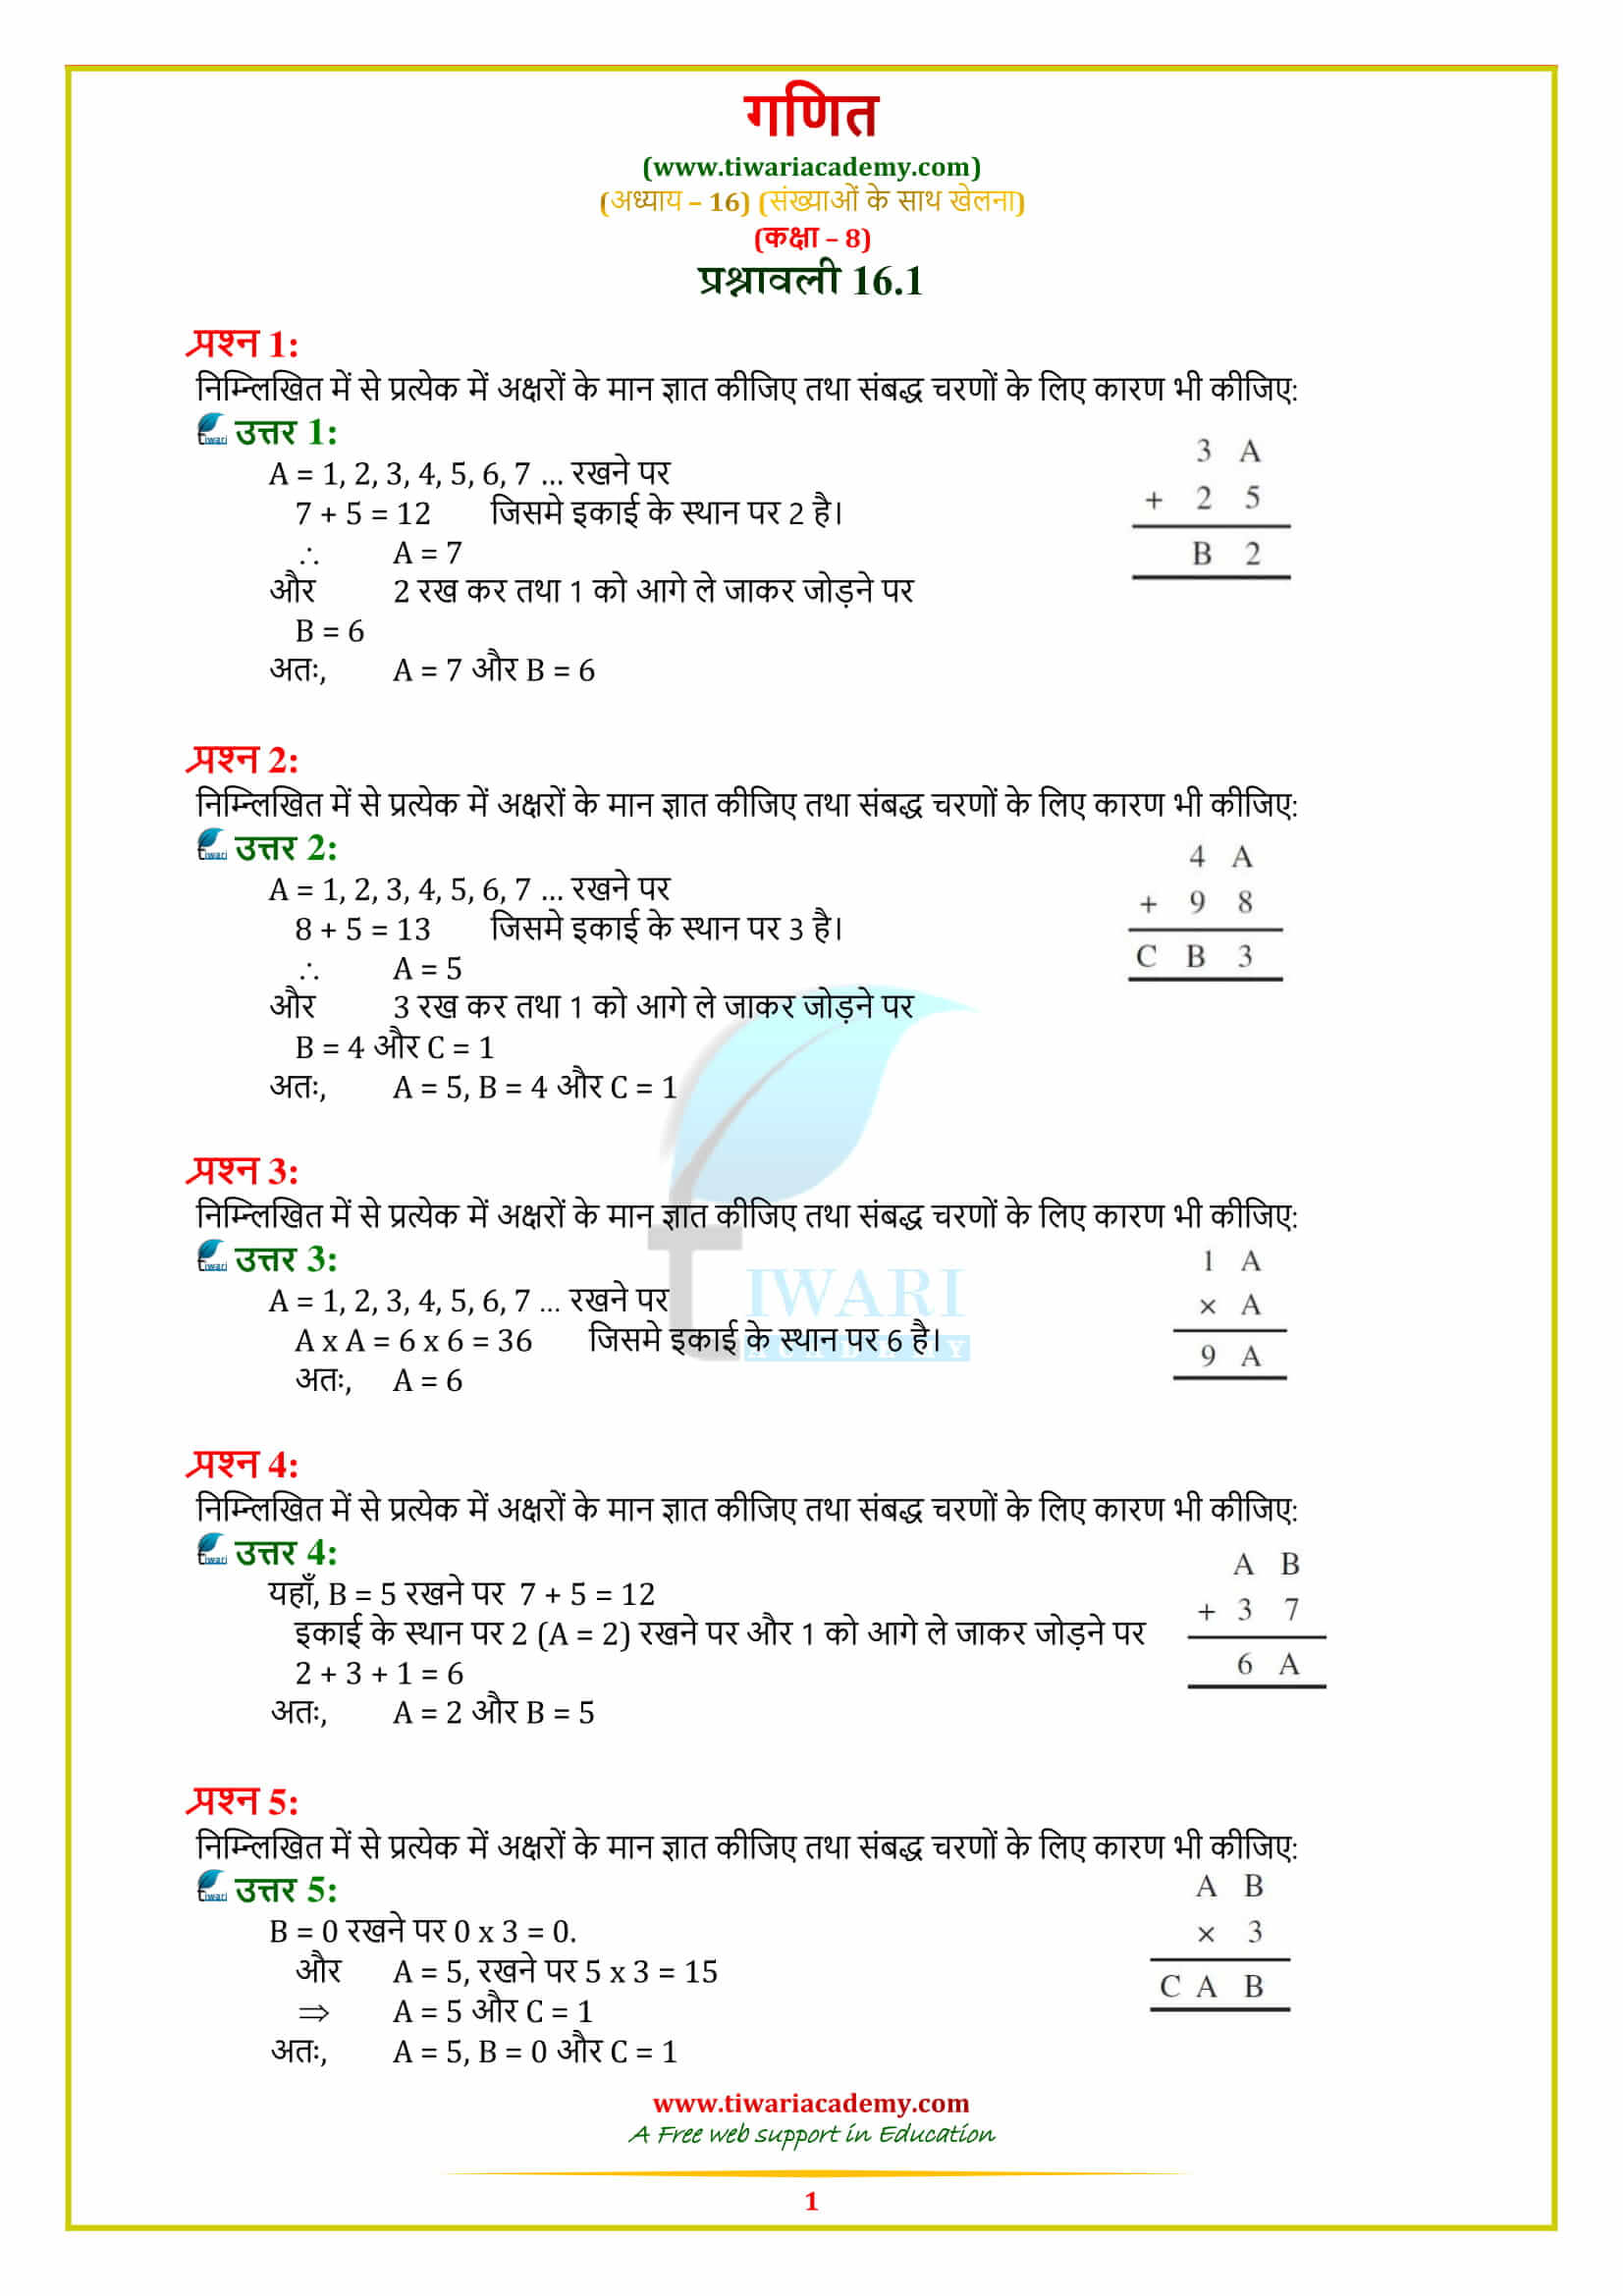 NCERT Solutions for Class 8 Maths Chapter 16 Exercise 16.1 in pdf form free